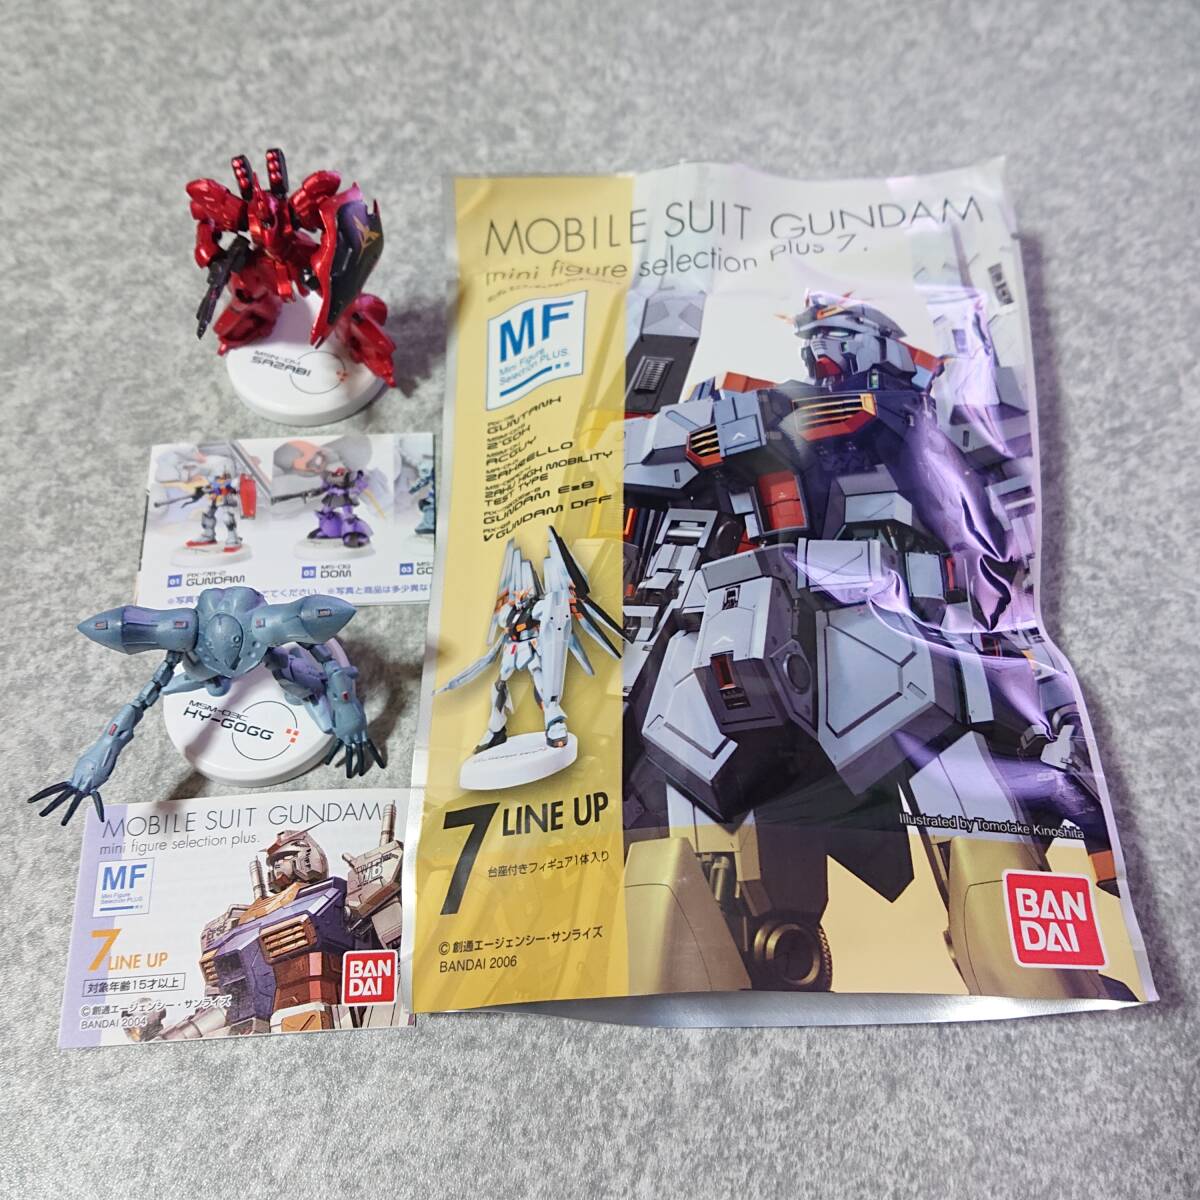  anonymity delivery Mobile Suit Gundam mini figure selection plus 7 Sazaby high gog